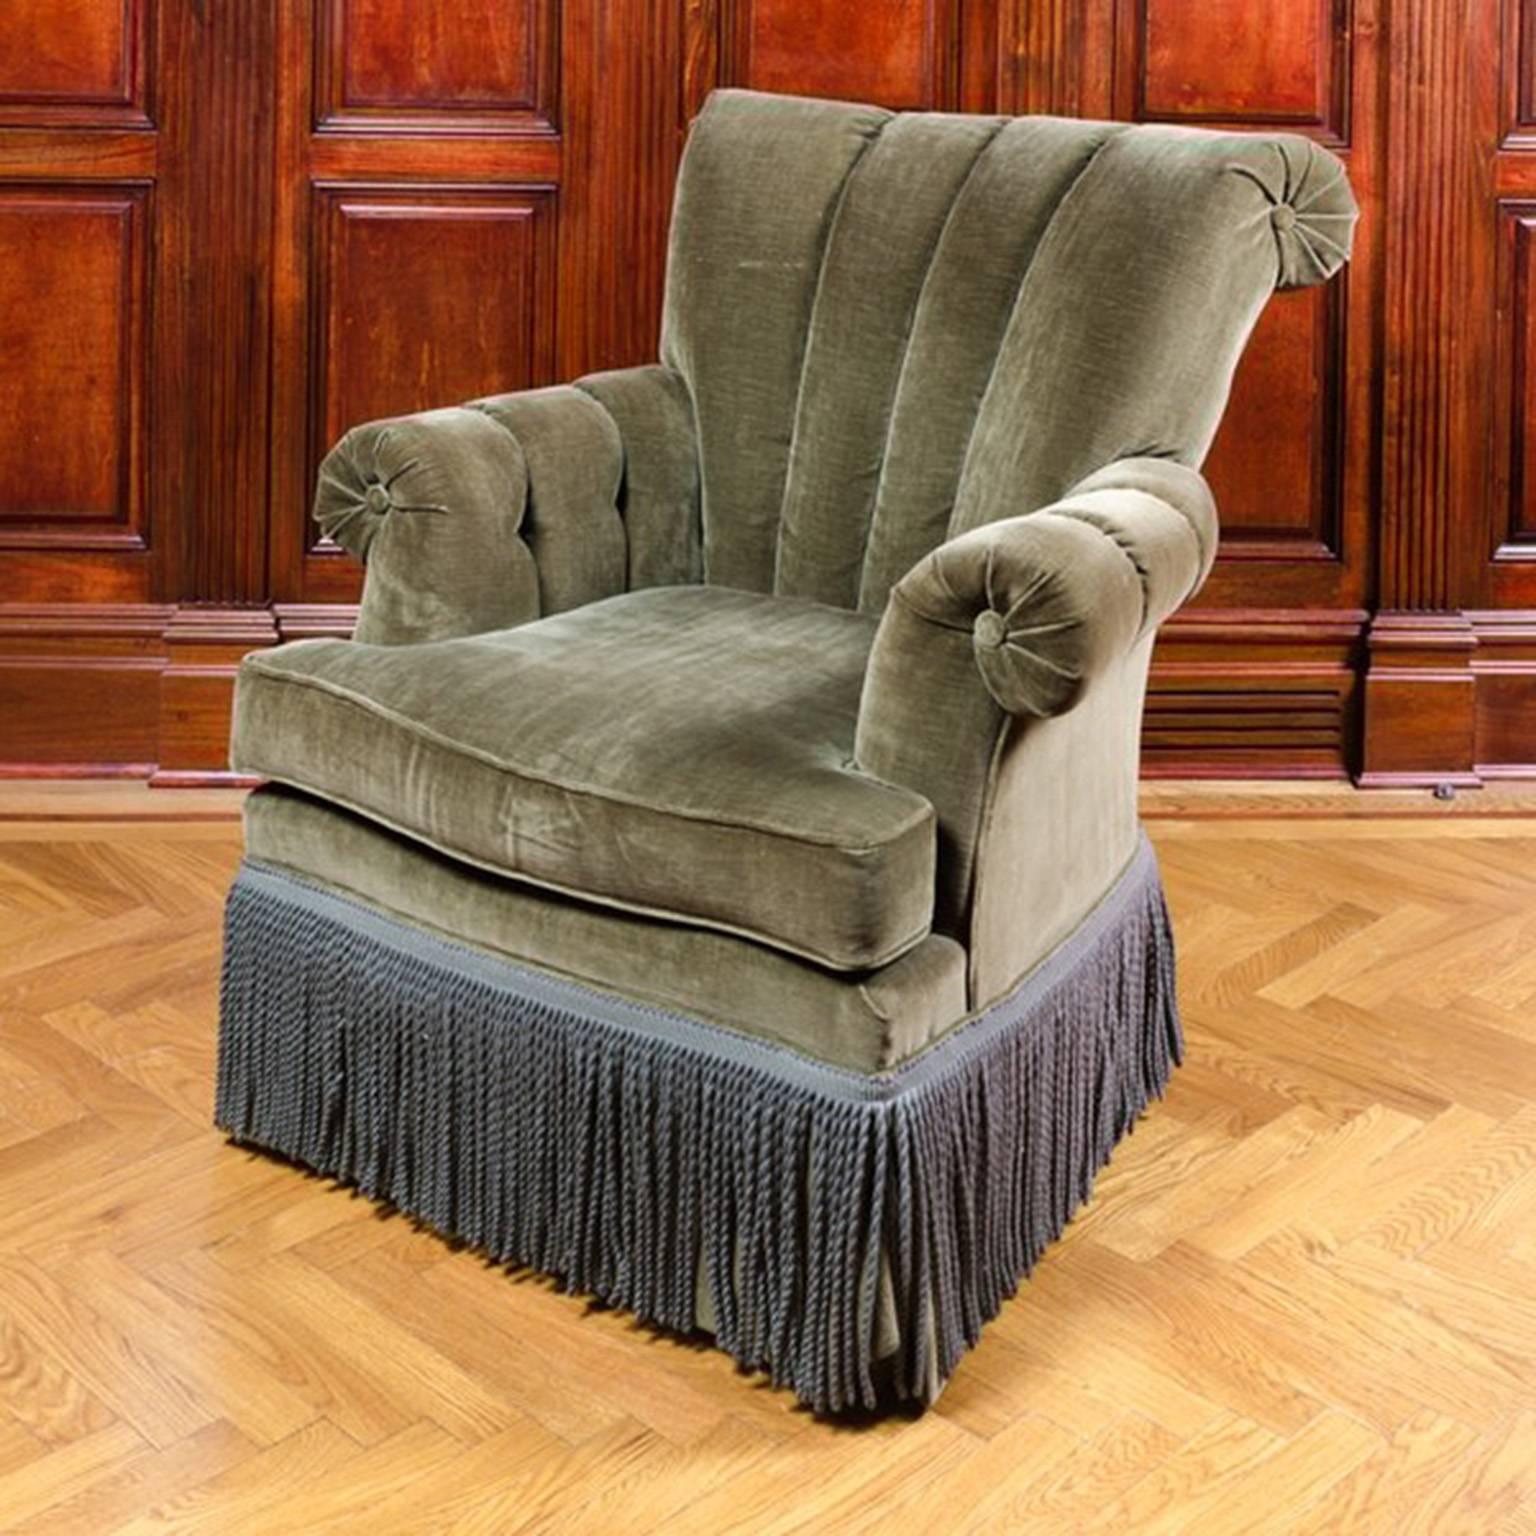 An armchair upholstered in olive green velvet. This chair features a rolled channel back and arms. It rests upon squared wooden legs and is embellished with a blue-gray fringe around the skirt.